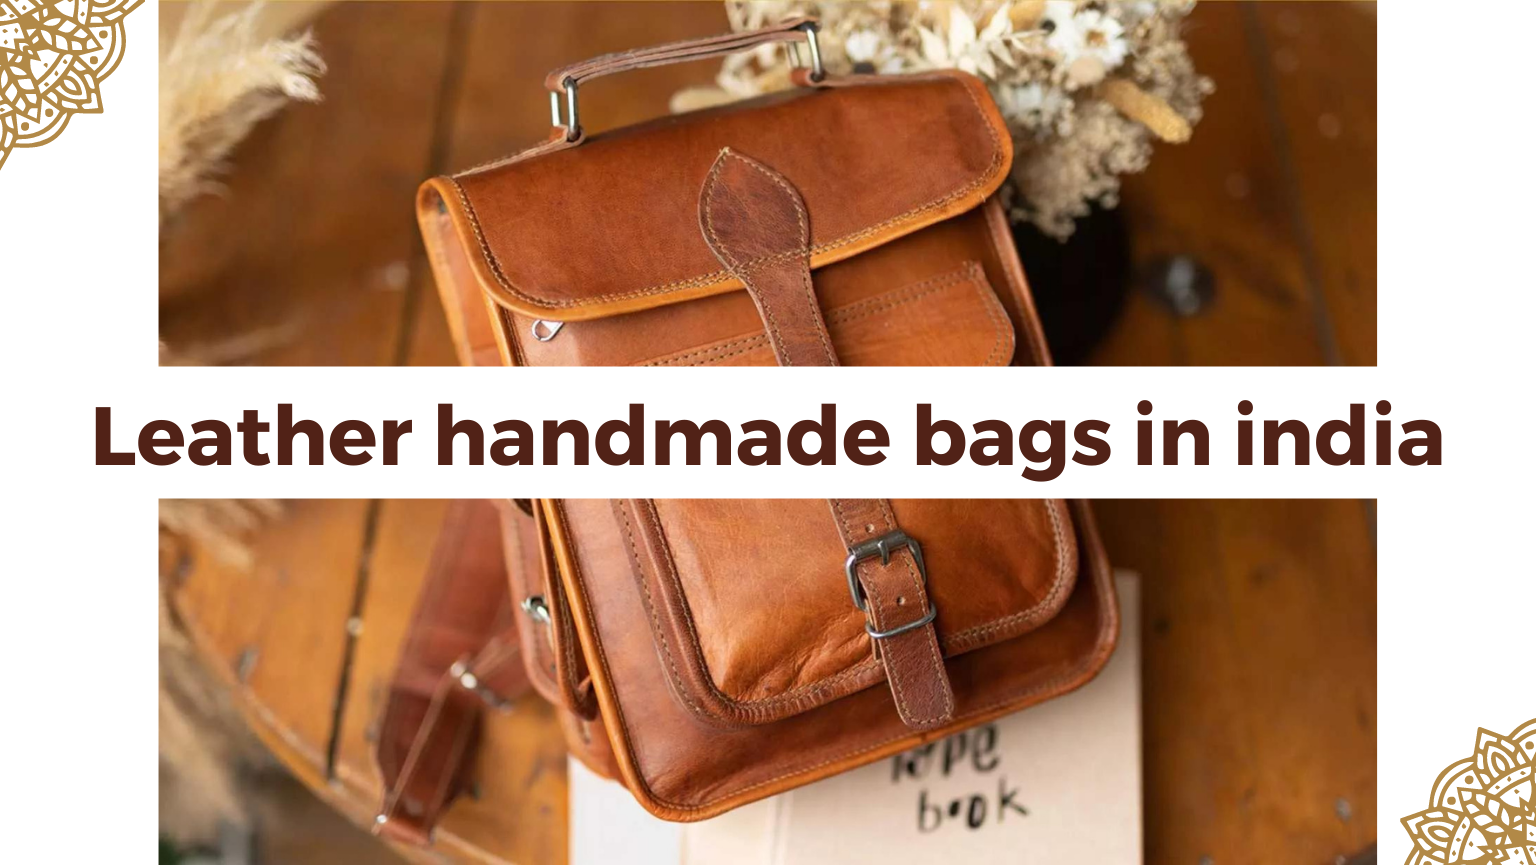 Handmade Leather Bags in India - Craftsmanship at Its Finest